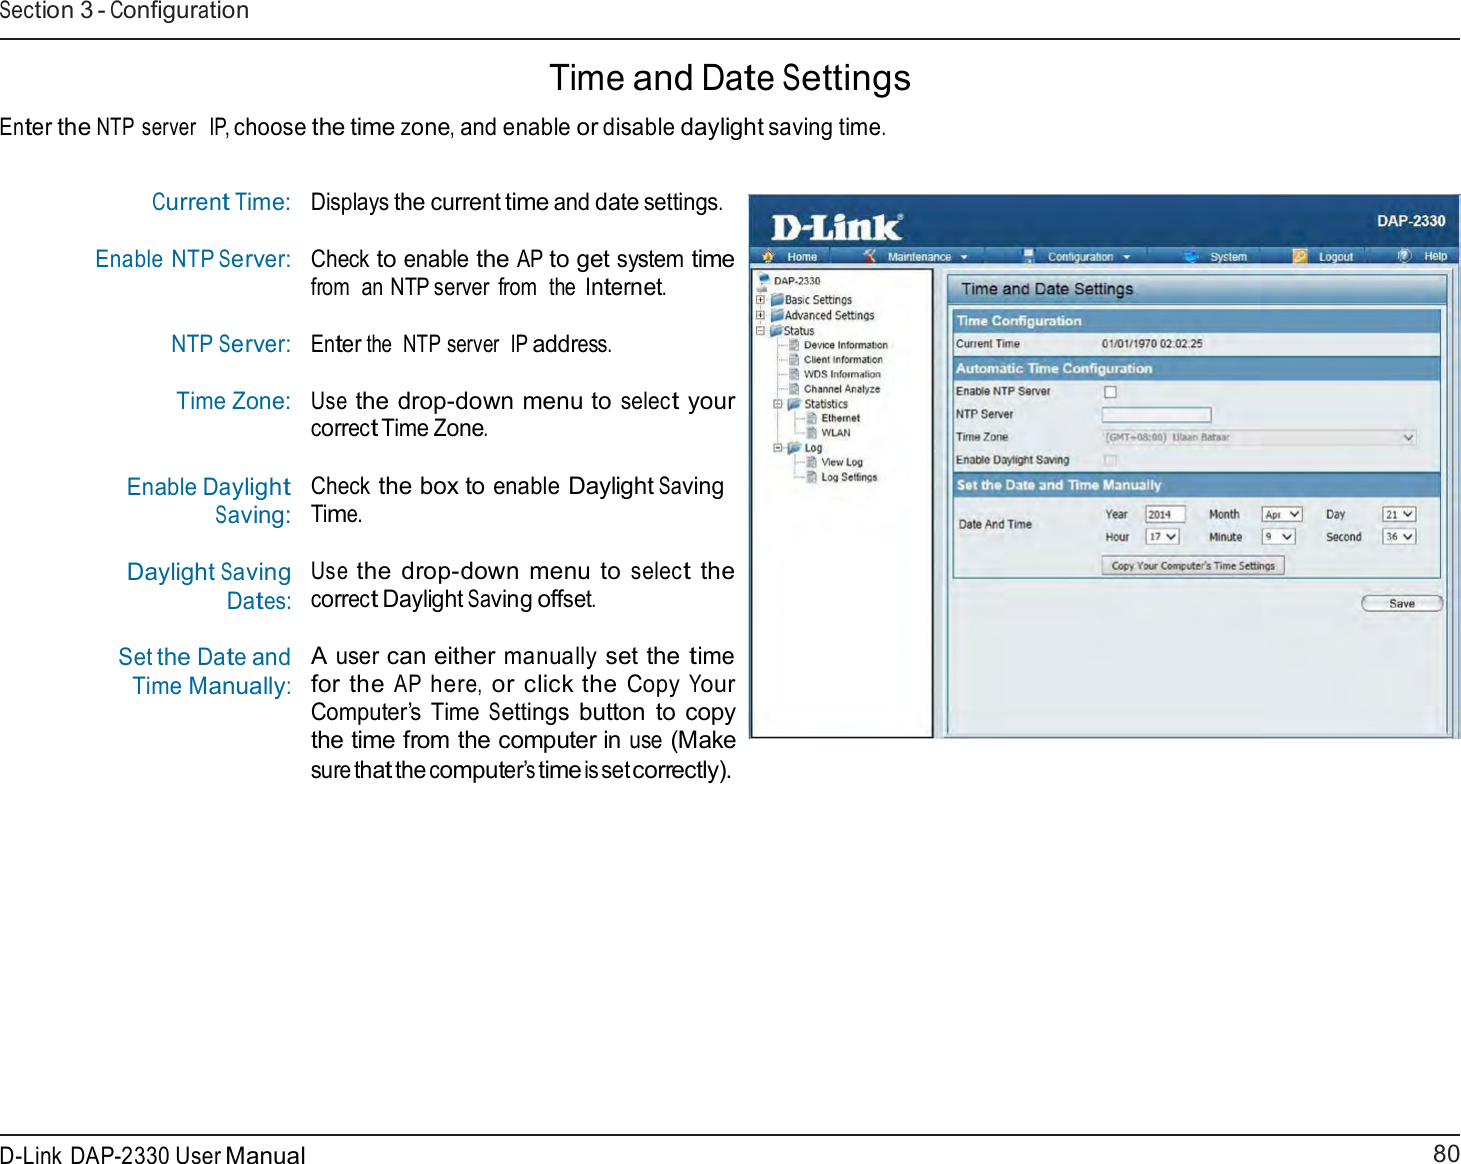 80 D-Link DAP-2330 User ManualSection 3 - Configuration     Time and Date Settings  Enter the NTP server   IP, choose the time zone, and enable or disable daylight saving time.   Current Time: Enable NTP Server:  NTP Server: Time Zone:  Enable Daylight Saving:  Daylight Saving Dates:  Set the Date and Time Manually: Displays the current time and date settings.  Check to enable the AP to get system time from  an NTP server  from  the  Internet.  Enter the  NTP server  IP address.  Use the drop-down menu to select your correct Time Zone.  Check the box to enable Daylight Saving Time.  Use the drop-down menu to select the correct Daylight Saving offset.  A user can either manually set the time for the AP here, or click the Copy Your Computer’s Time Settings button to copy the time from the computer in use (Make sure that the computer’s time is set correctly). 